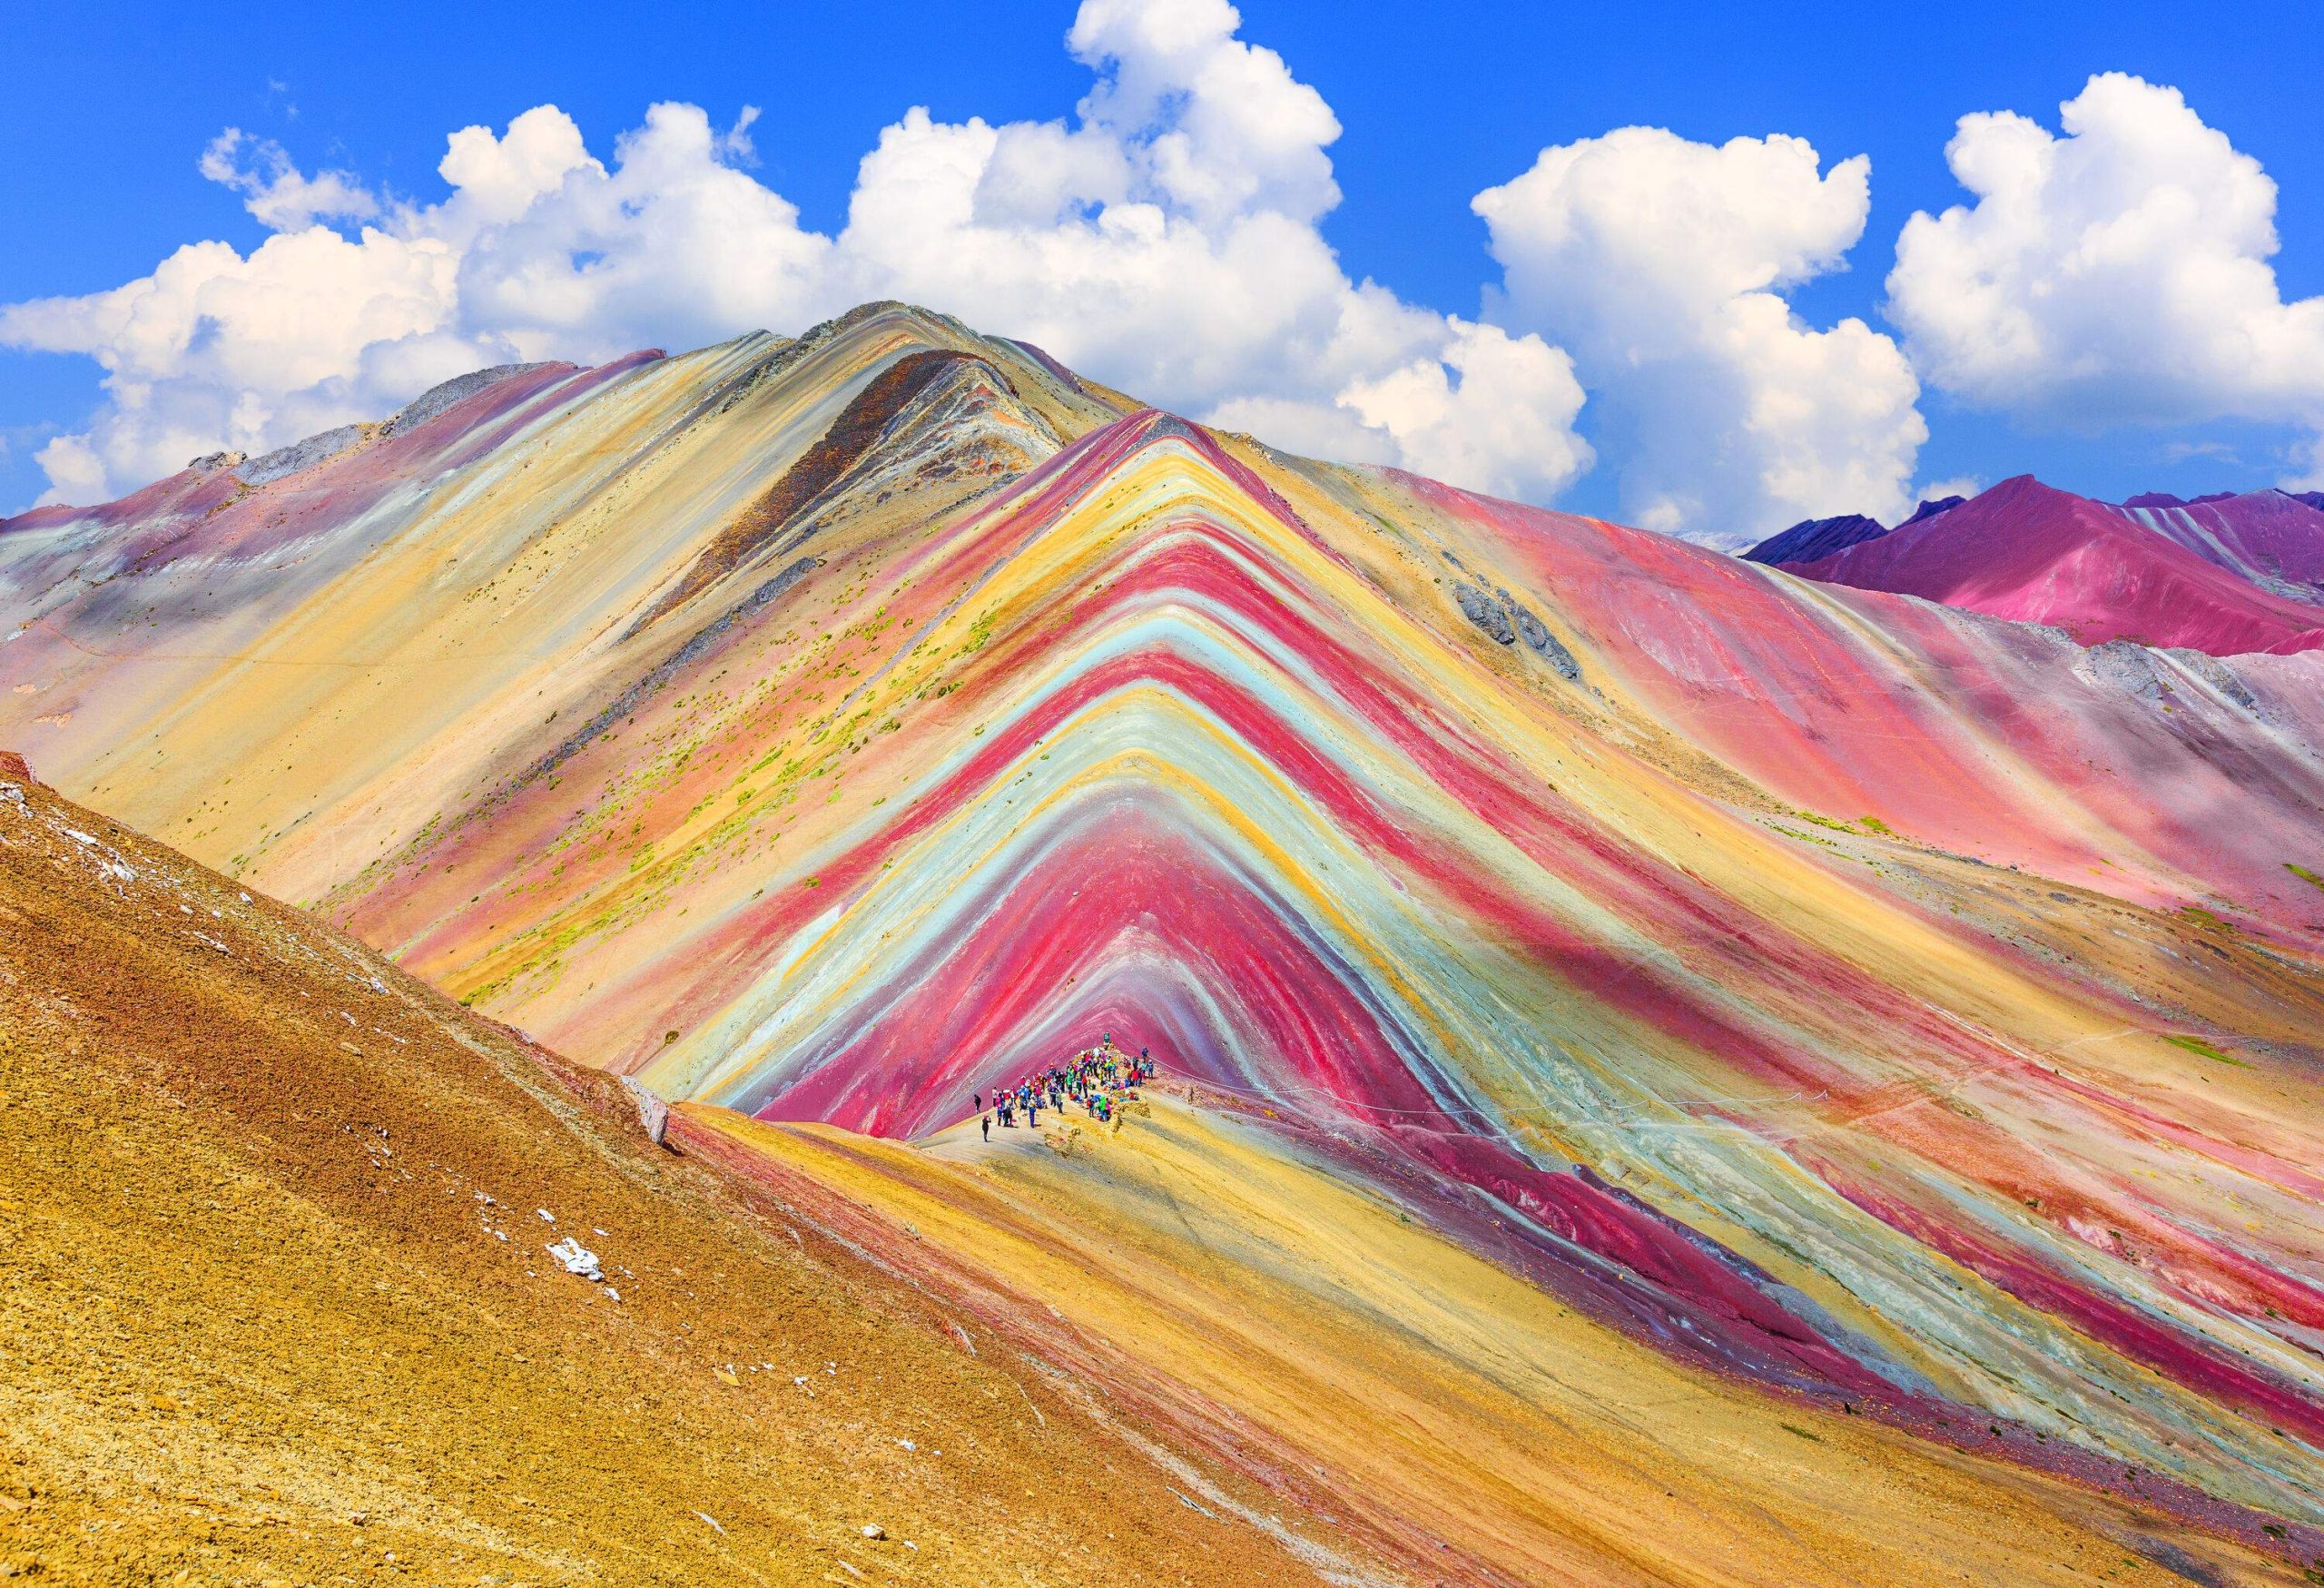 People standing on the colourful ridges of a mountain range.